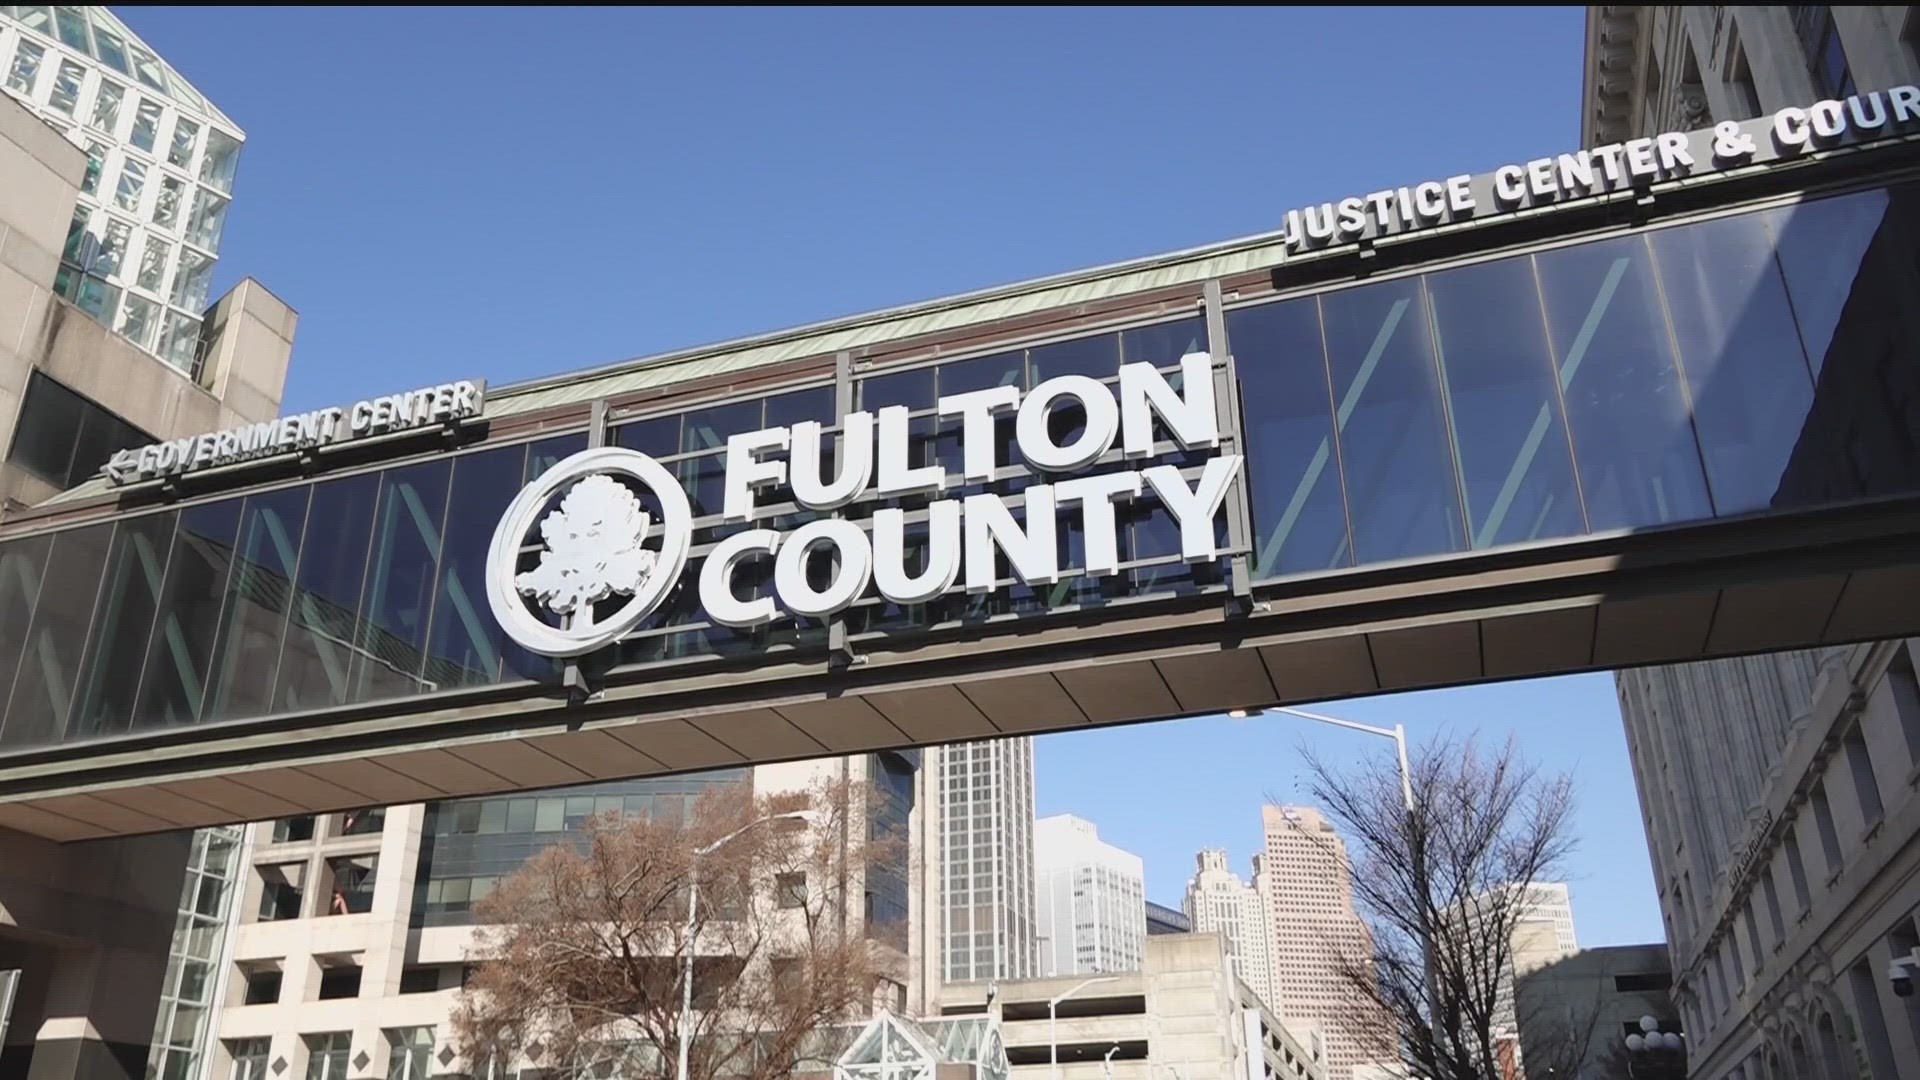 A Fulton County commissioner confirmed that the criminals responsible have already claimed responsibility.